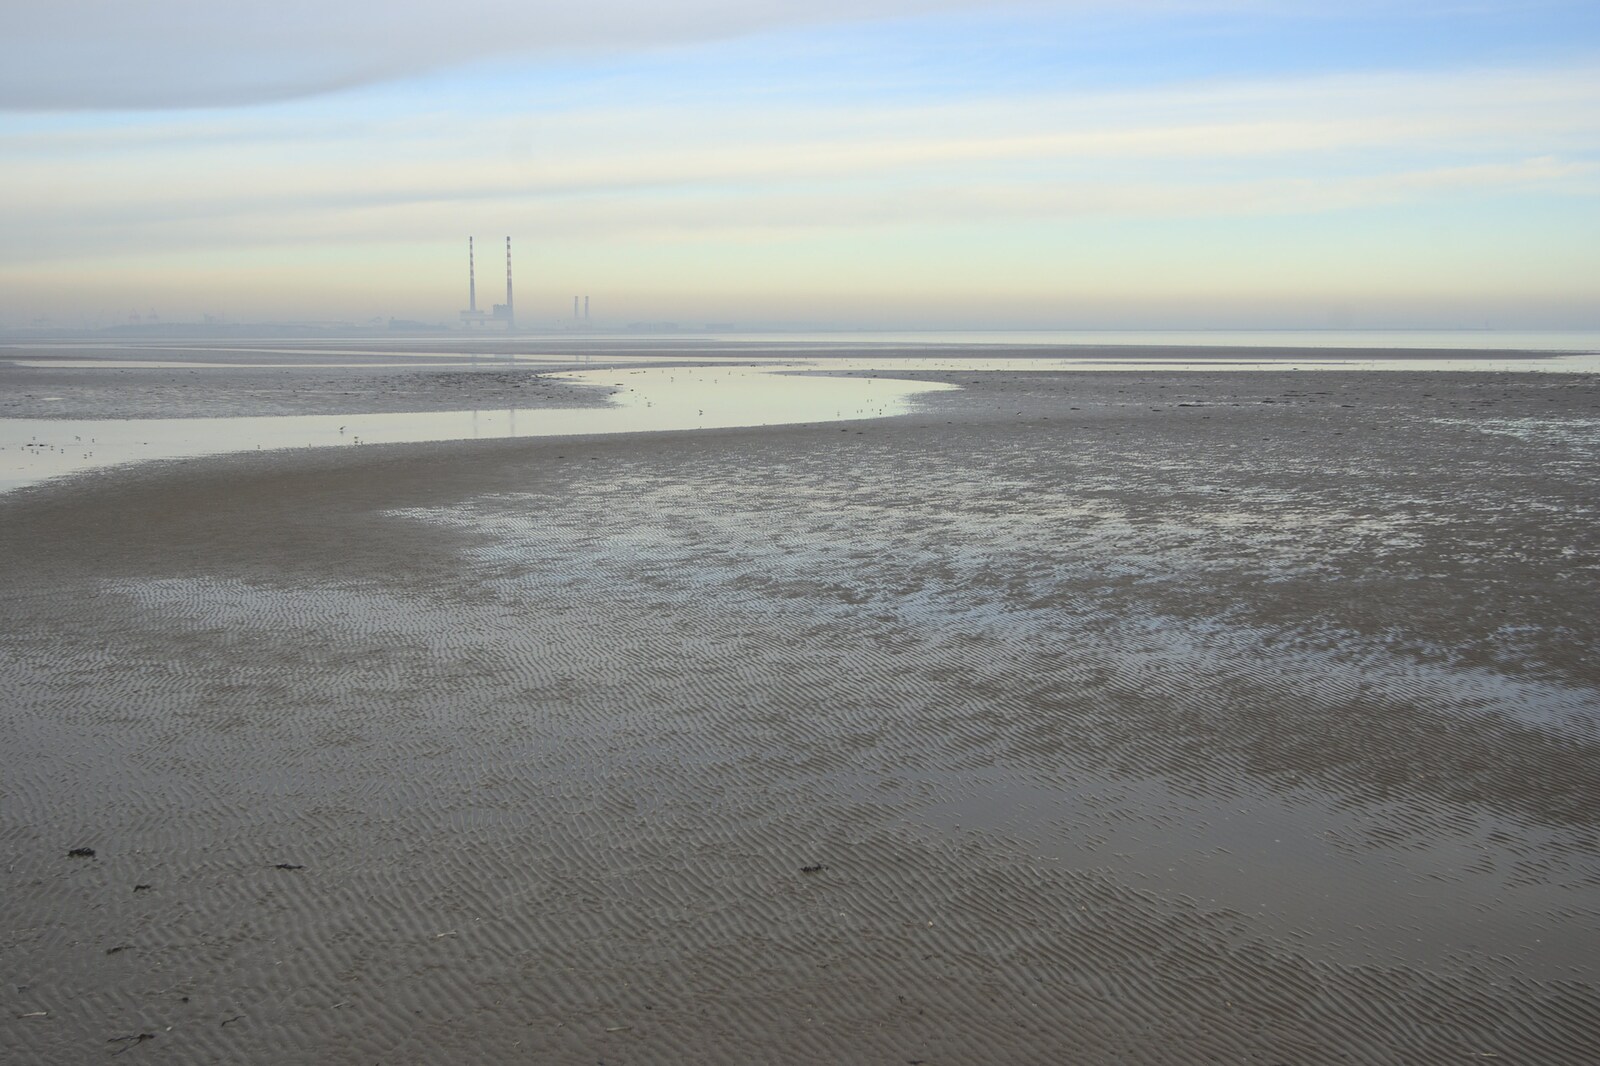 A wider view of Dublin Bay and the mudflats from Christmas at Number 19, Blackrock, County Dublin, Ireland - 25th December 2009